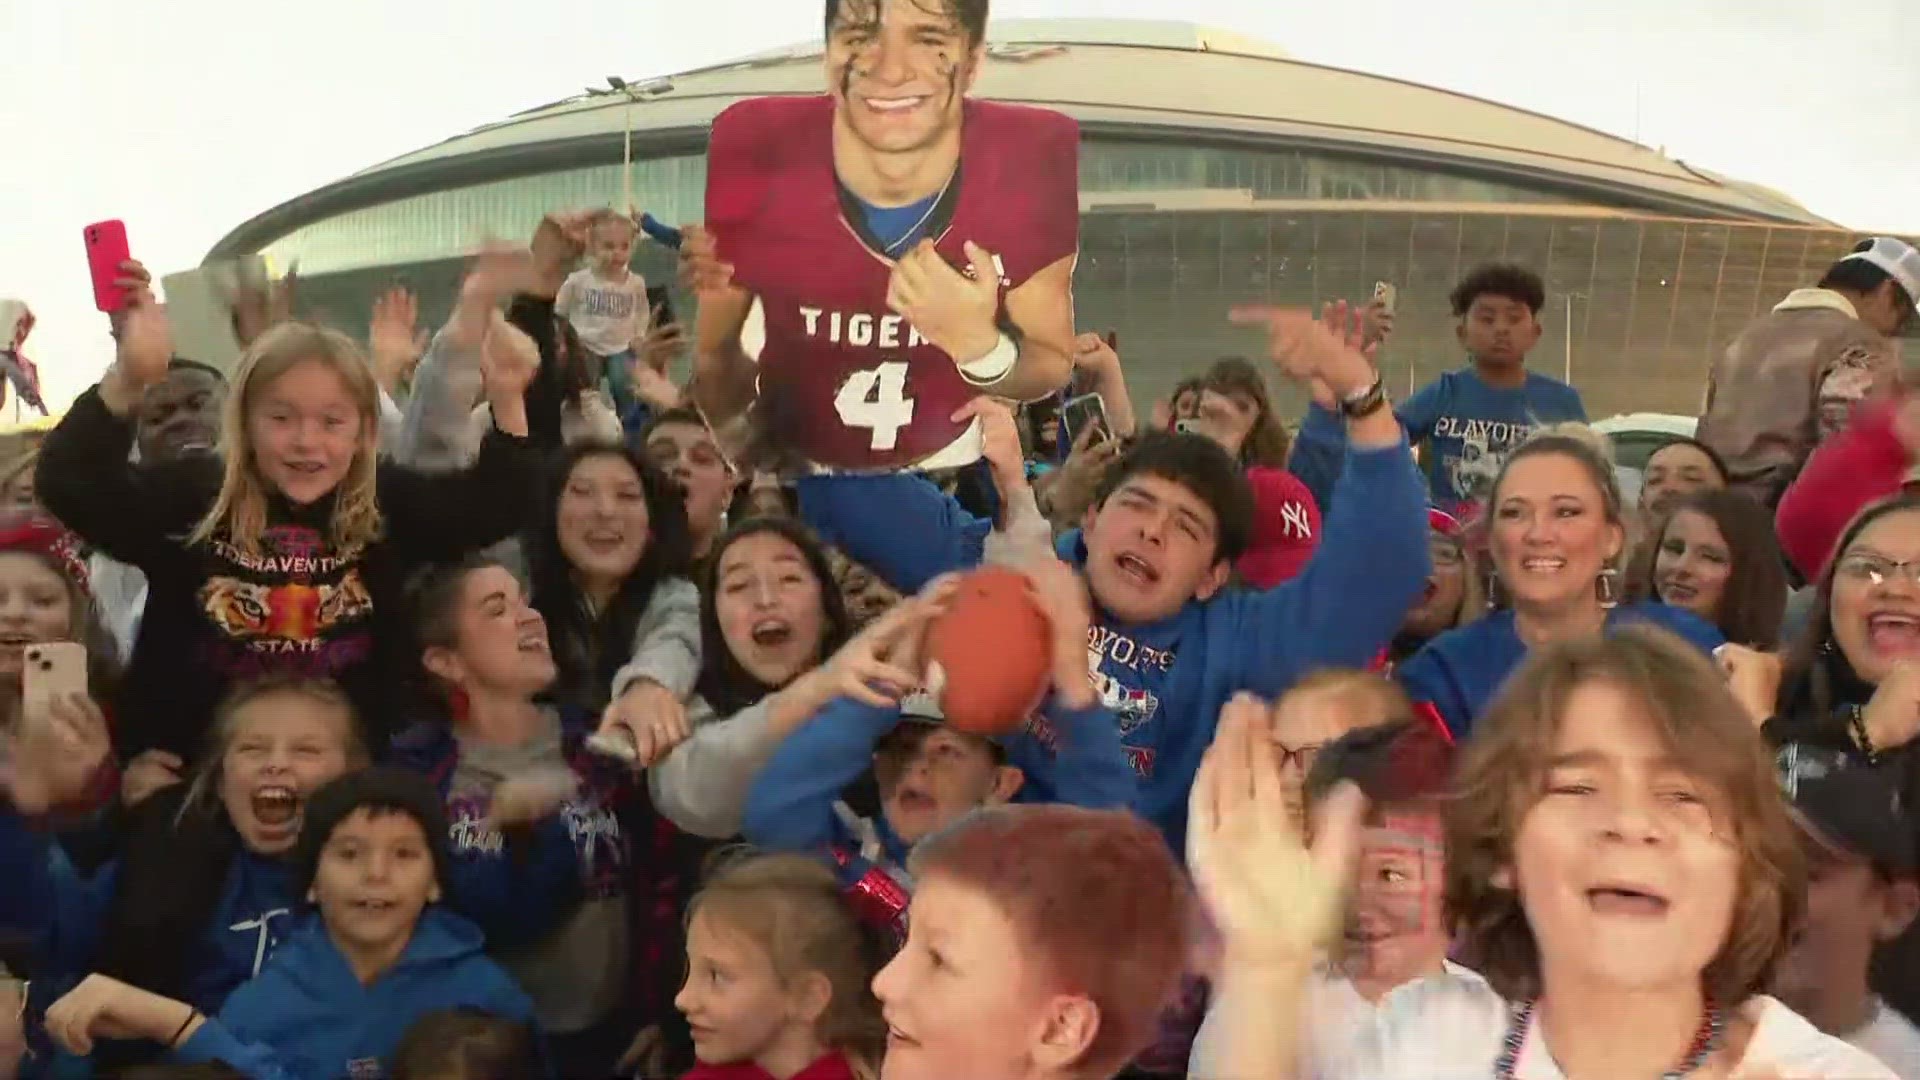 KHOU 11's Zack Tawatari is in Arlington for the big game on Thursday.